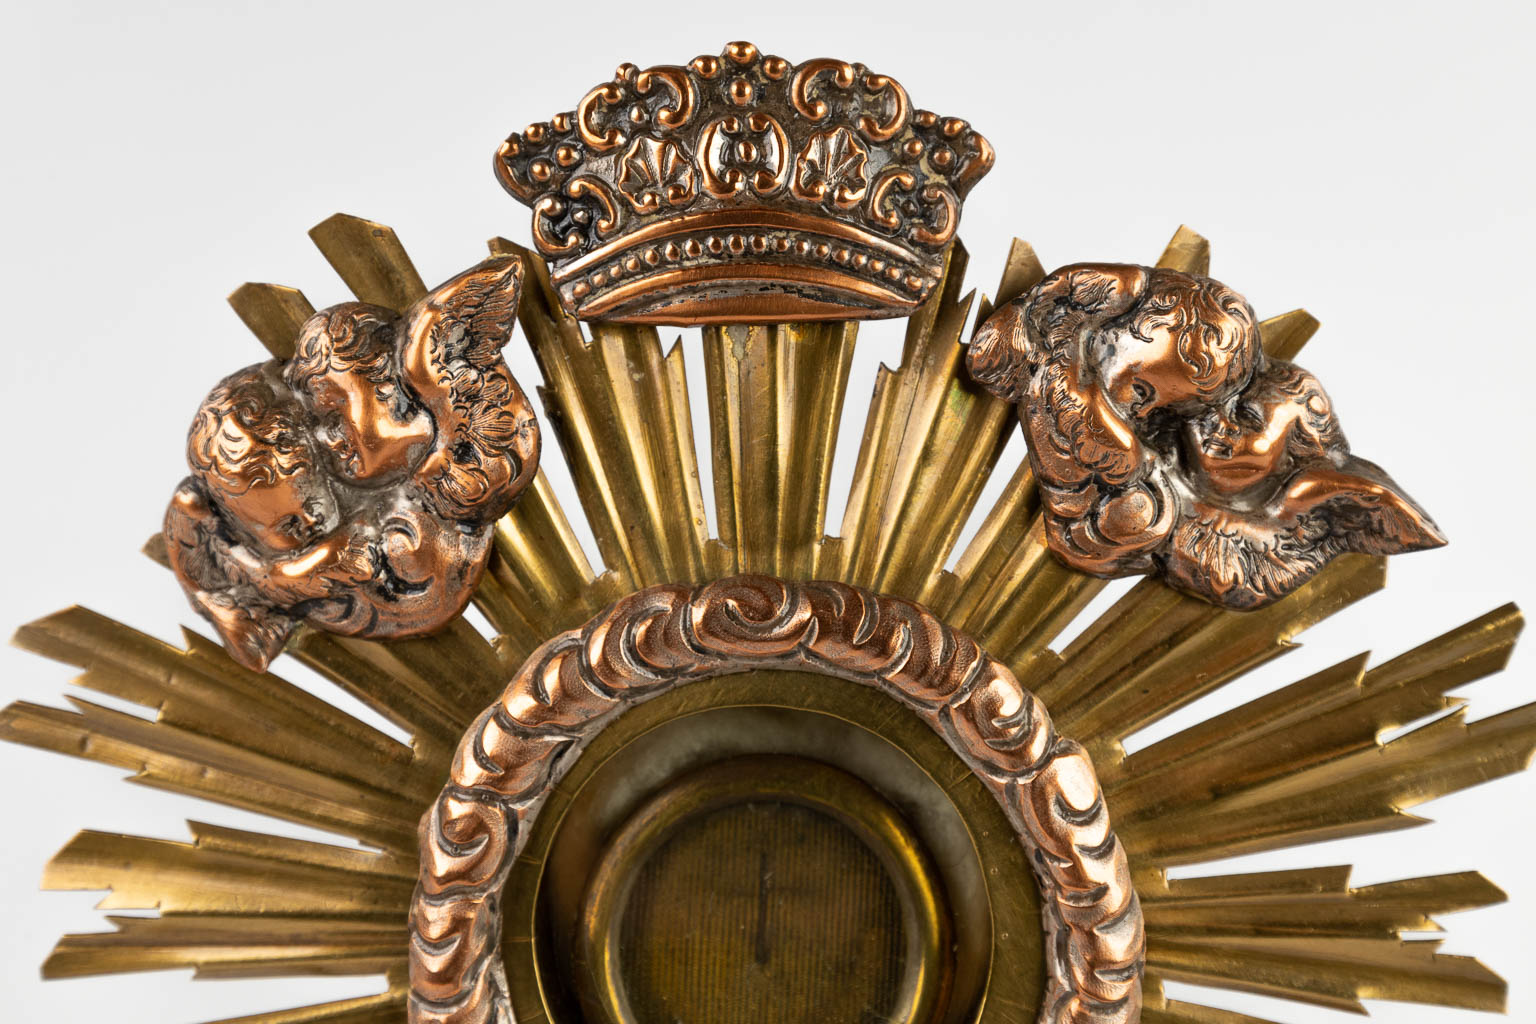 A small sunburst monstrance with a relic of the true cross. (D:11 x W:16 x H:29 cm)